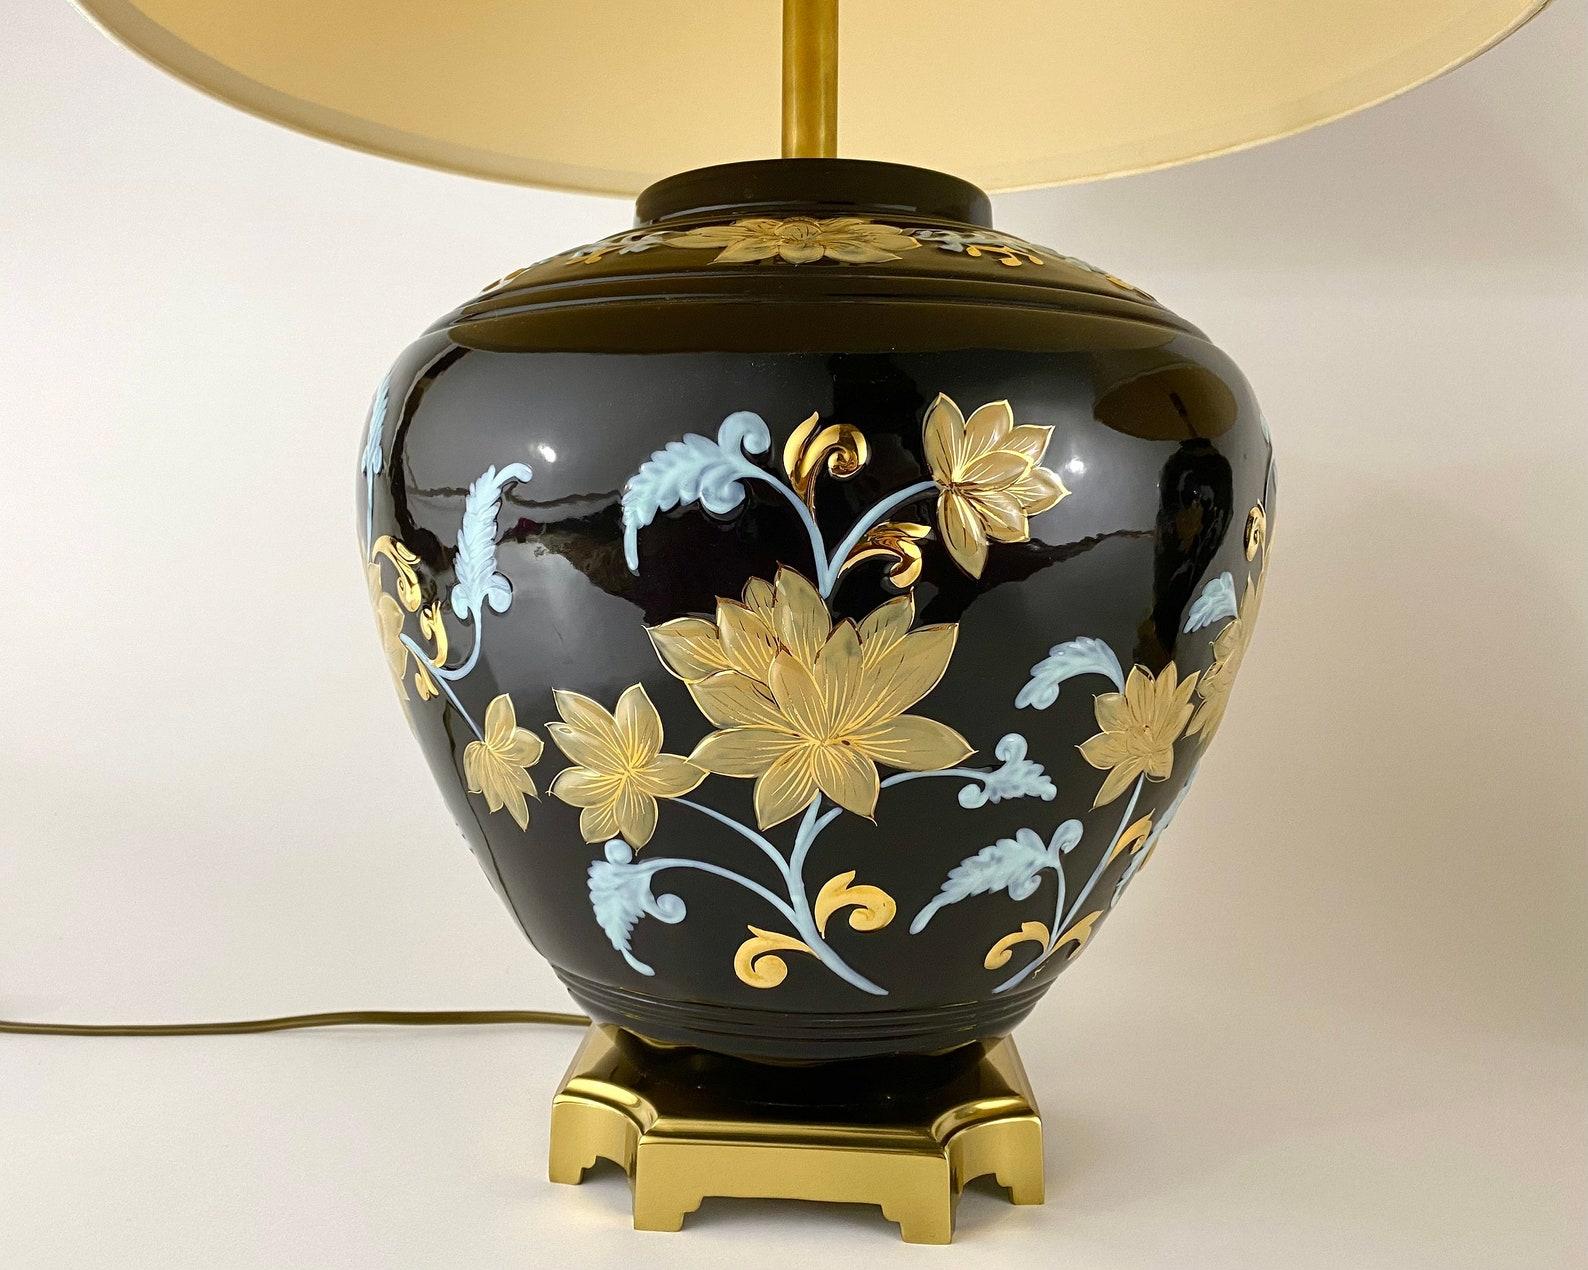 A charming and elegant pair of lamps. The porcelain body is hand painted and has a nice shine. 

 The quality can definitely be seen through the paintings, design, shape and the colour palette. The lamp is enhanced with several ornate bronze parts.